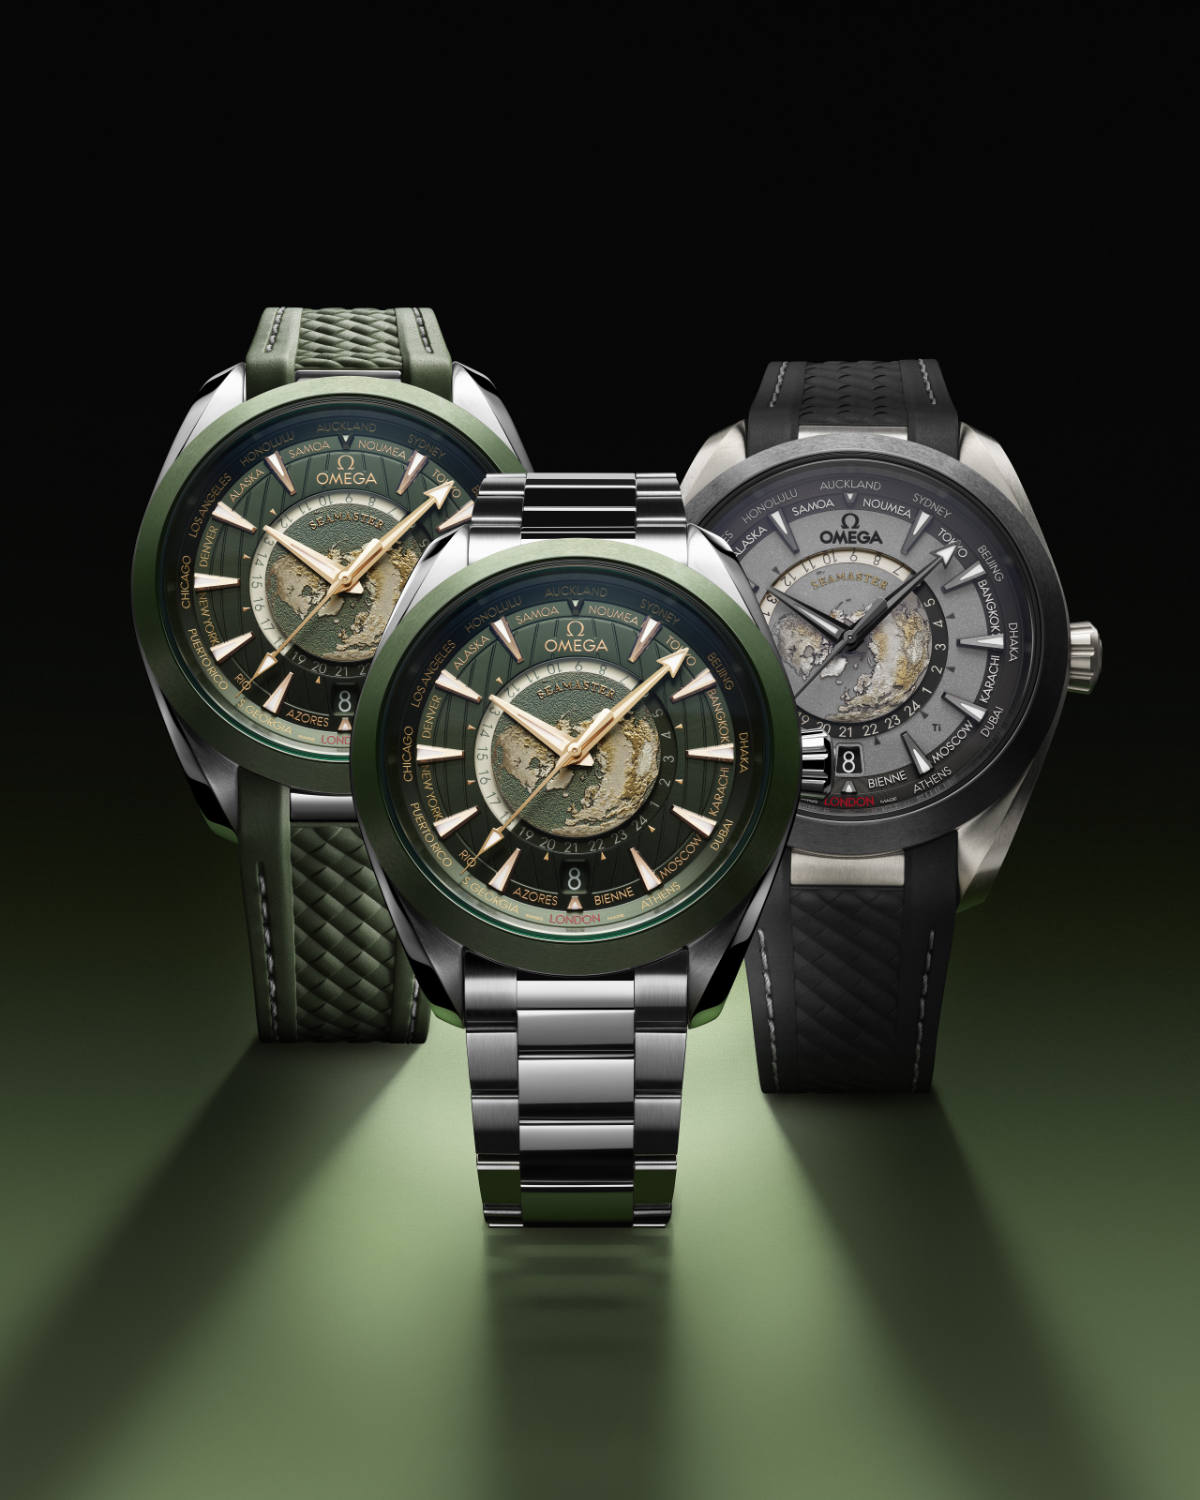 OMEGA Expands The Worldtimer Collection To Include Three New Models